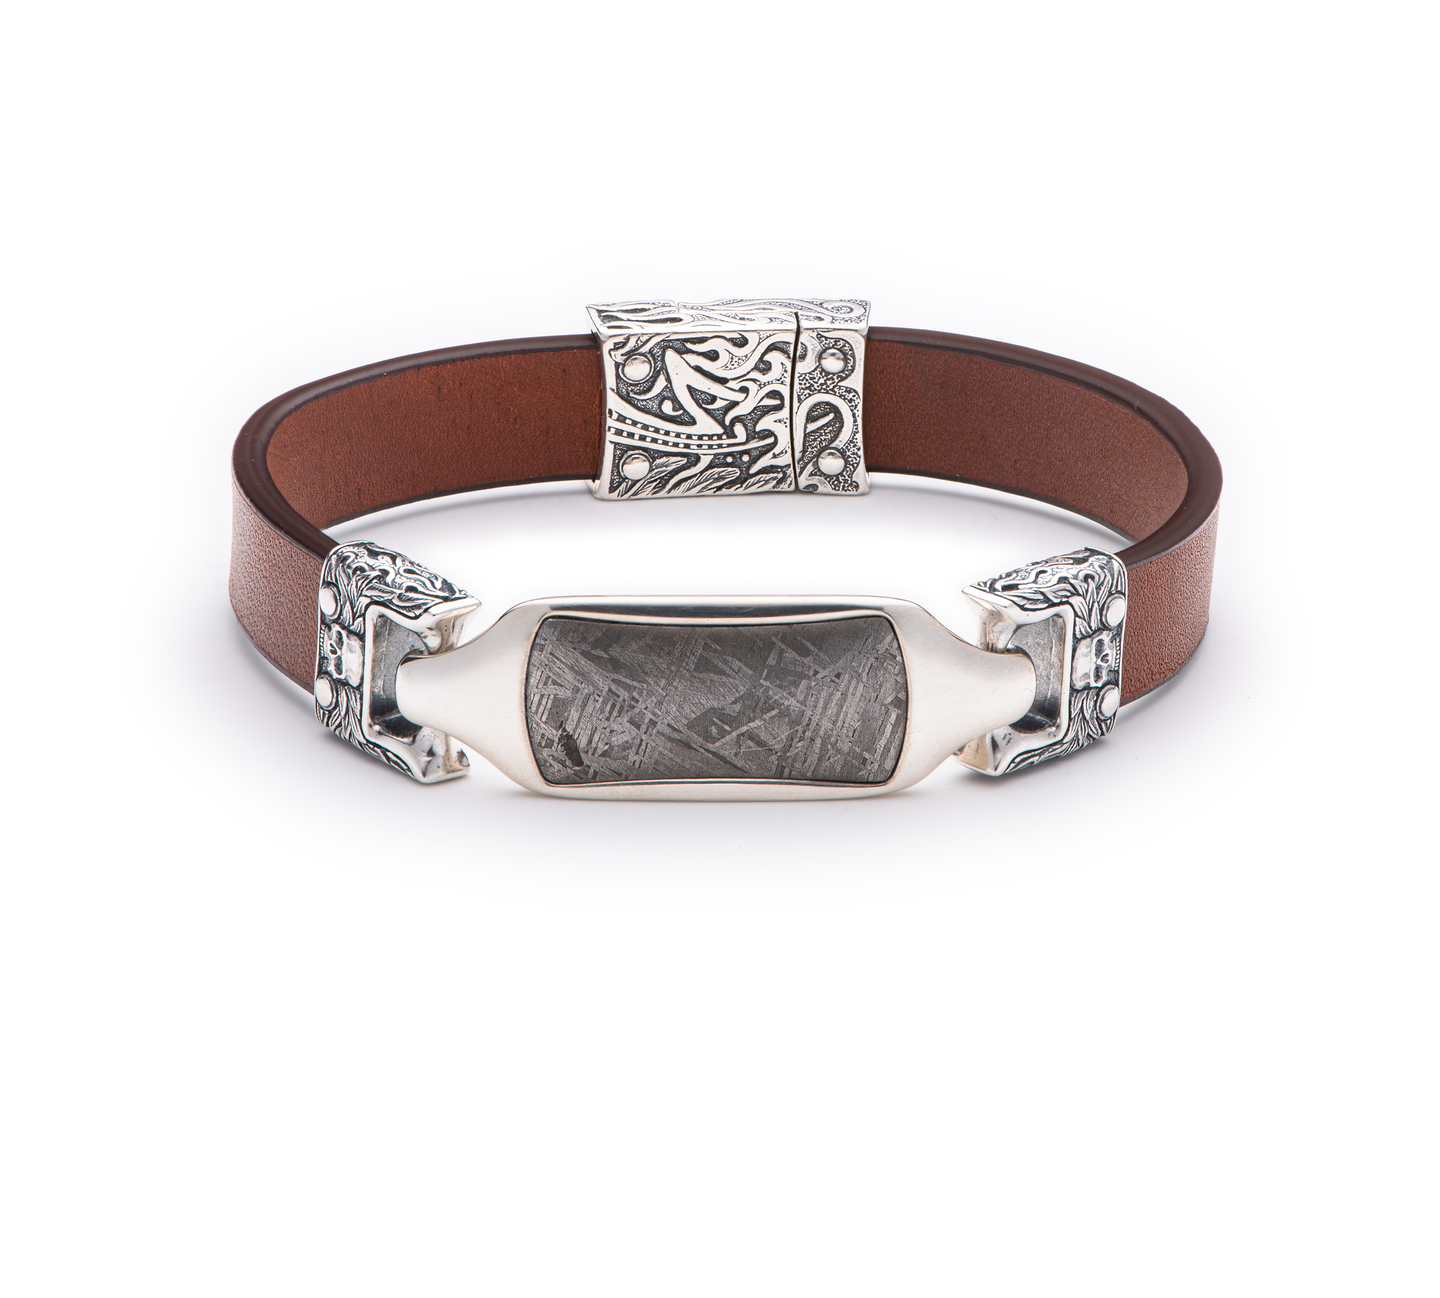 William Henry Layla Meteorite ID Bracelet with Leather Strap